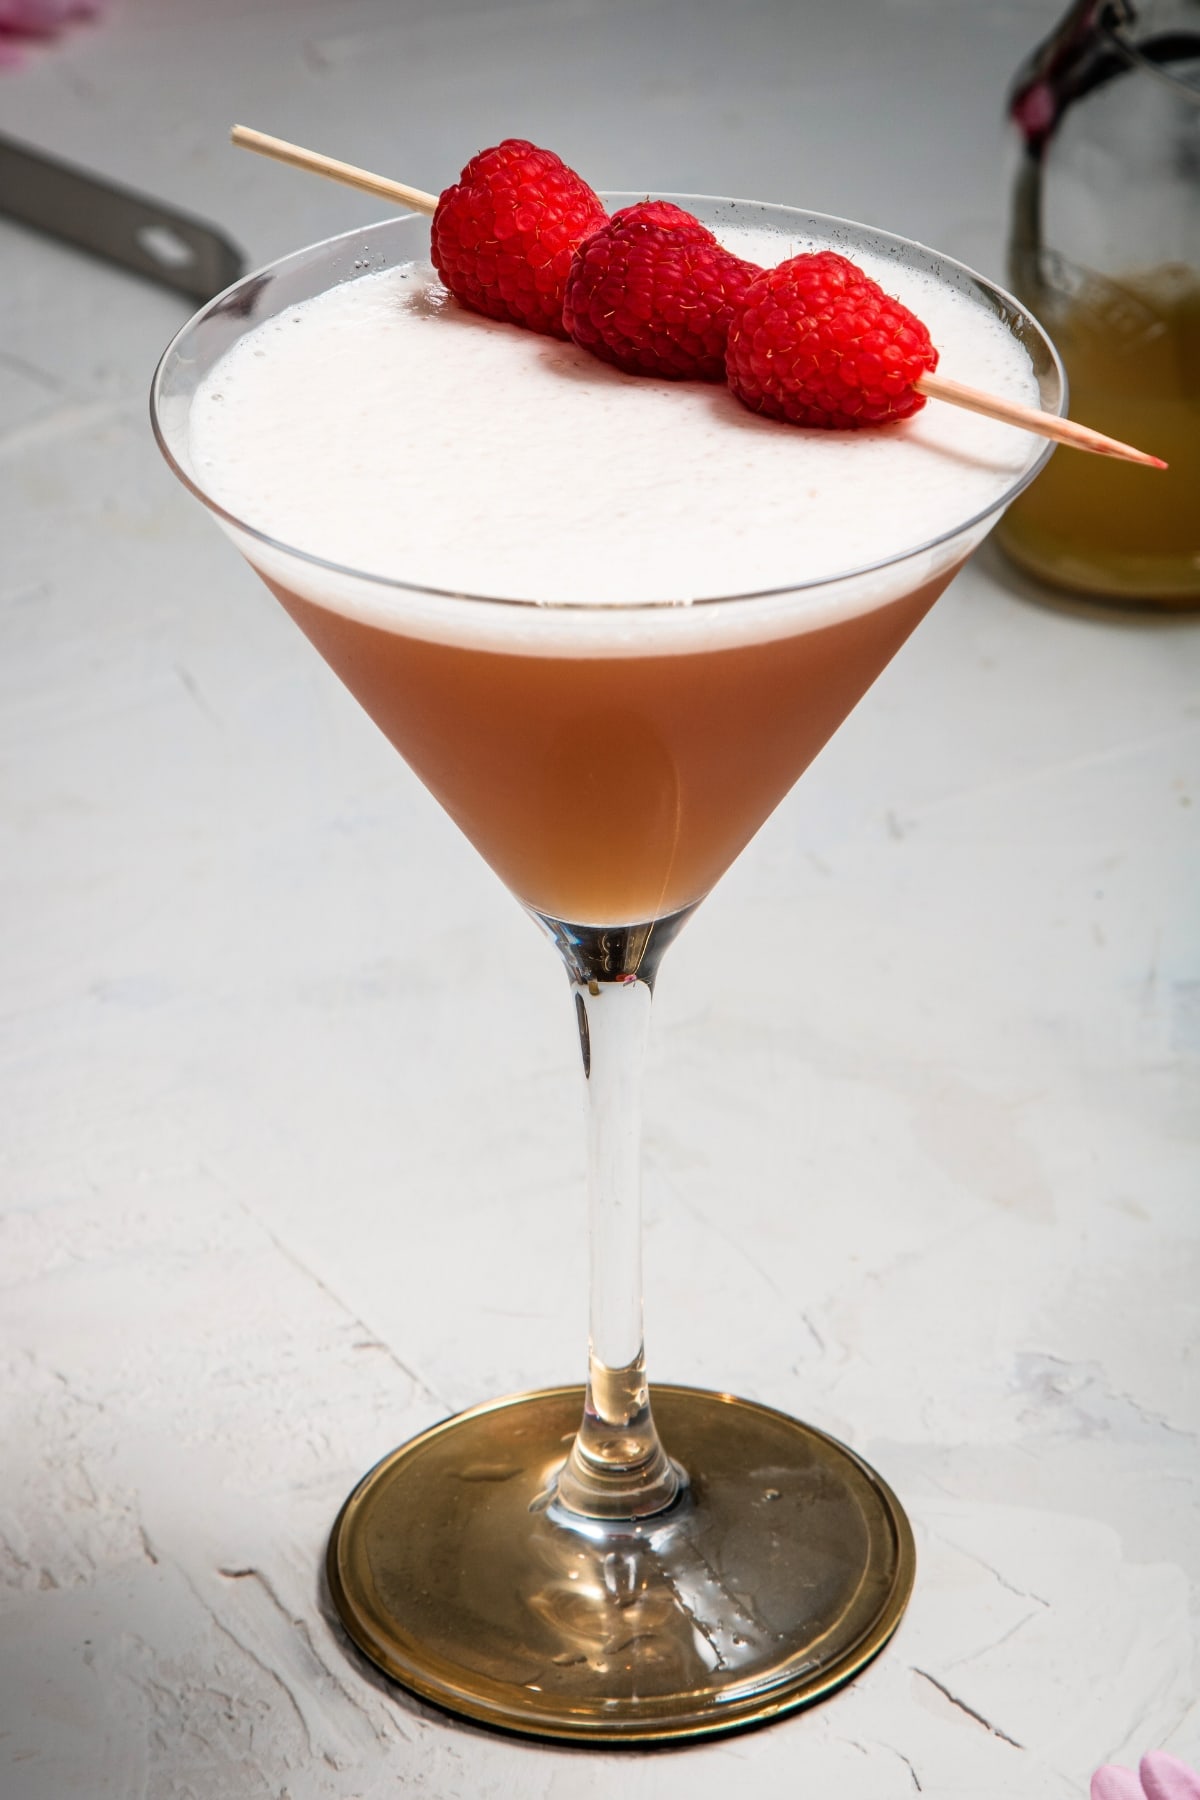 Homemade French Martini with Raspberries in a Wine Glass